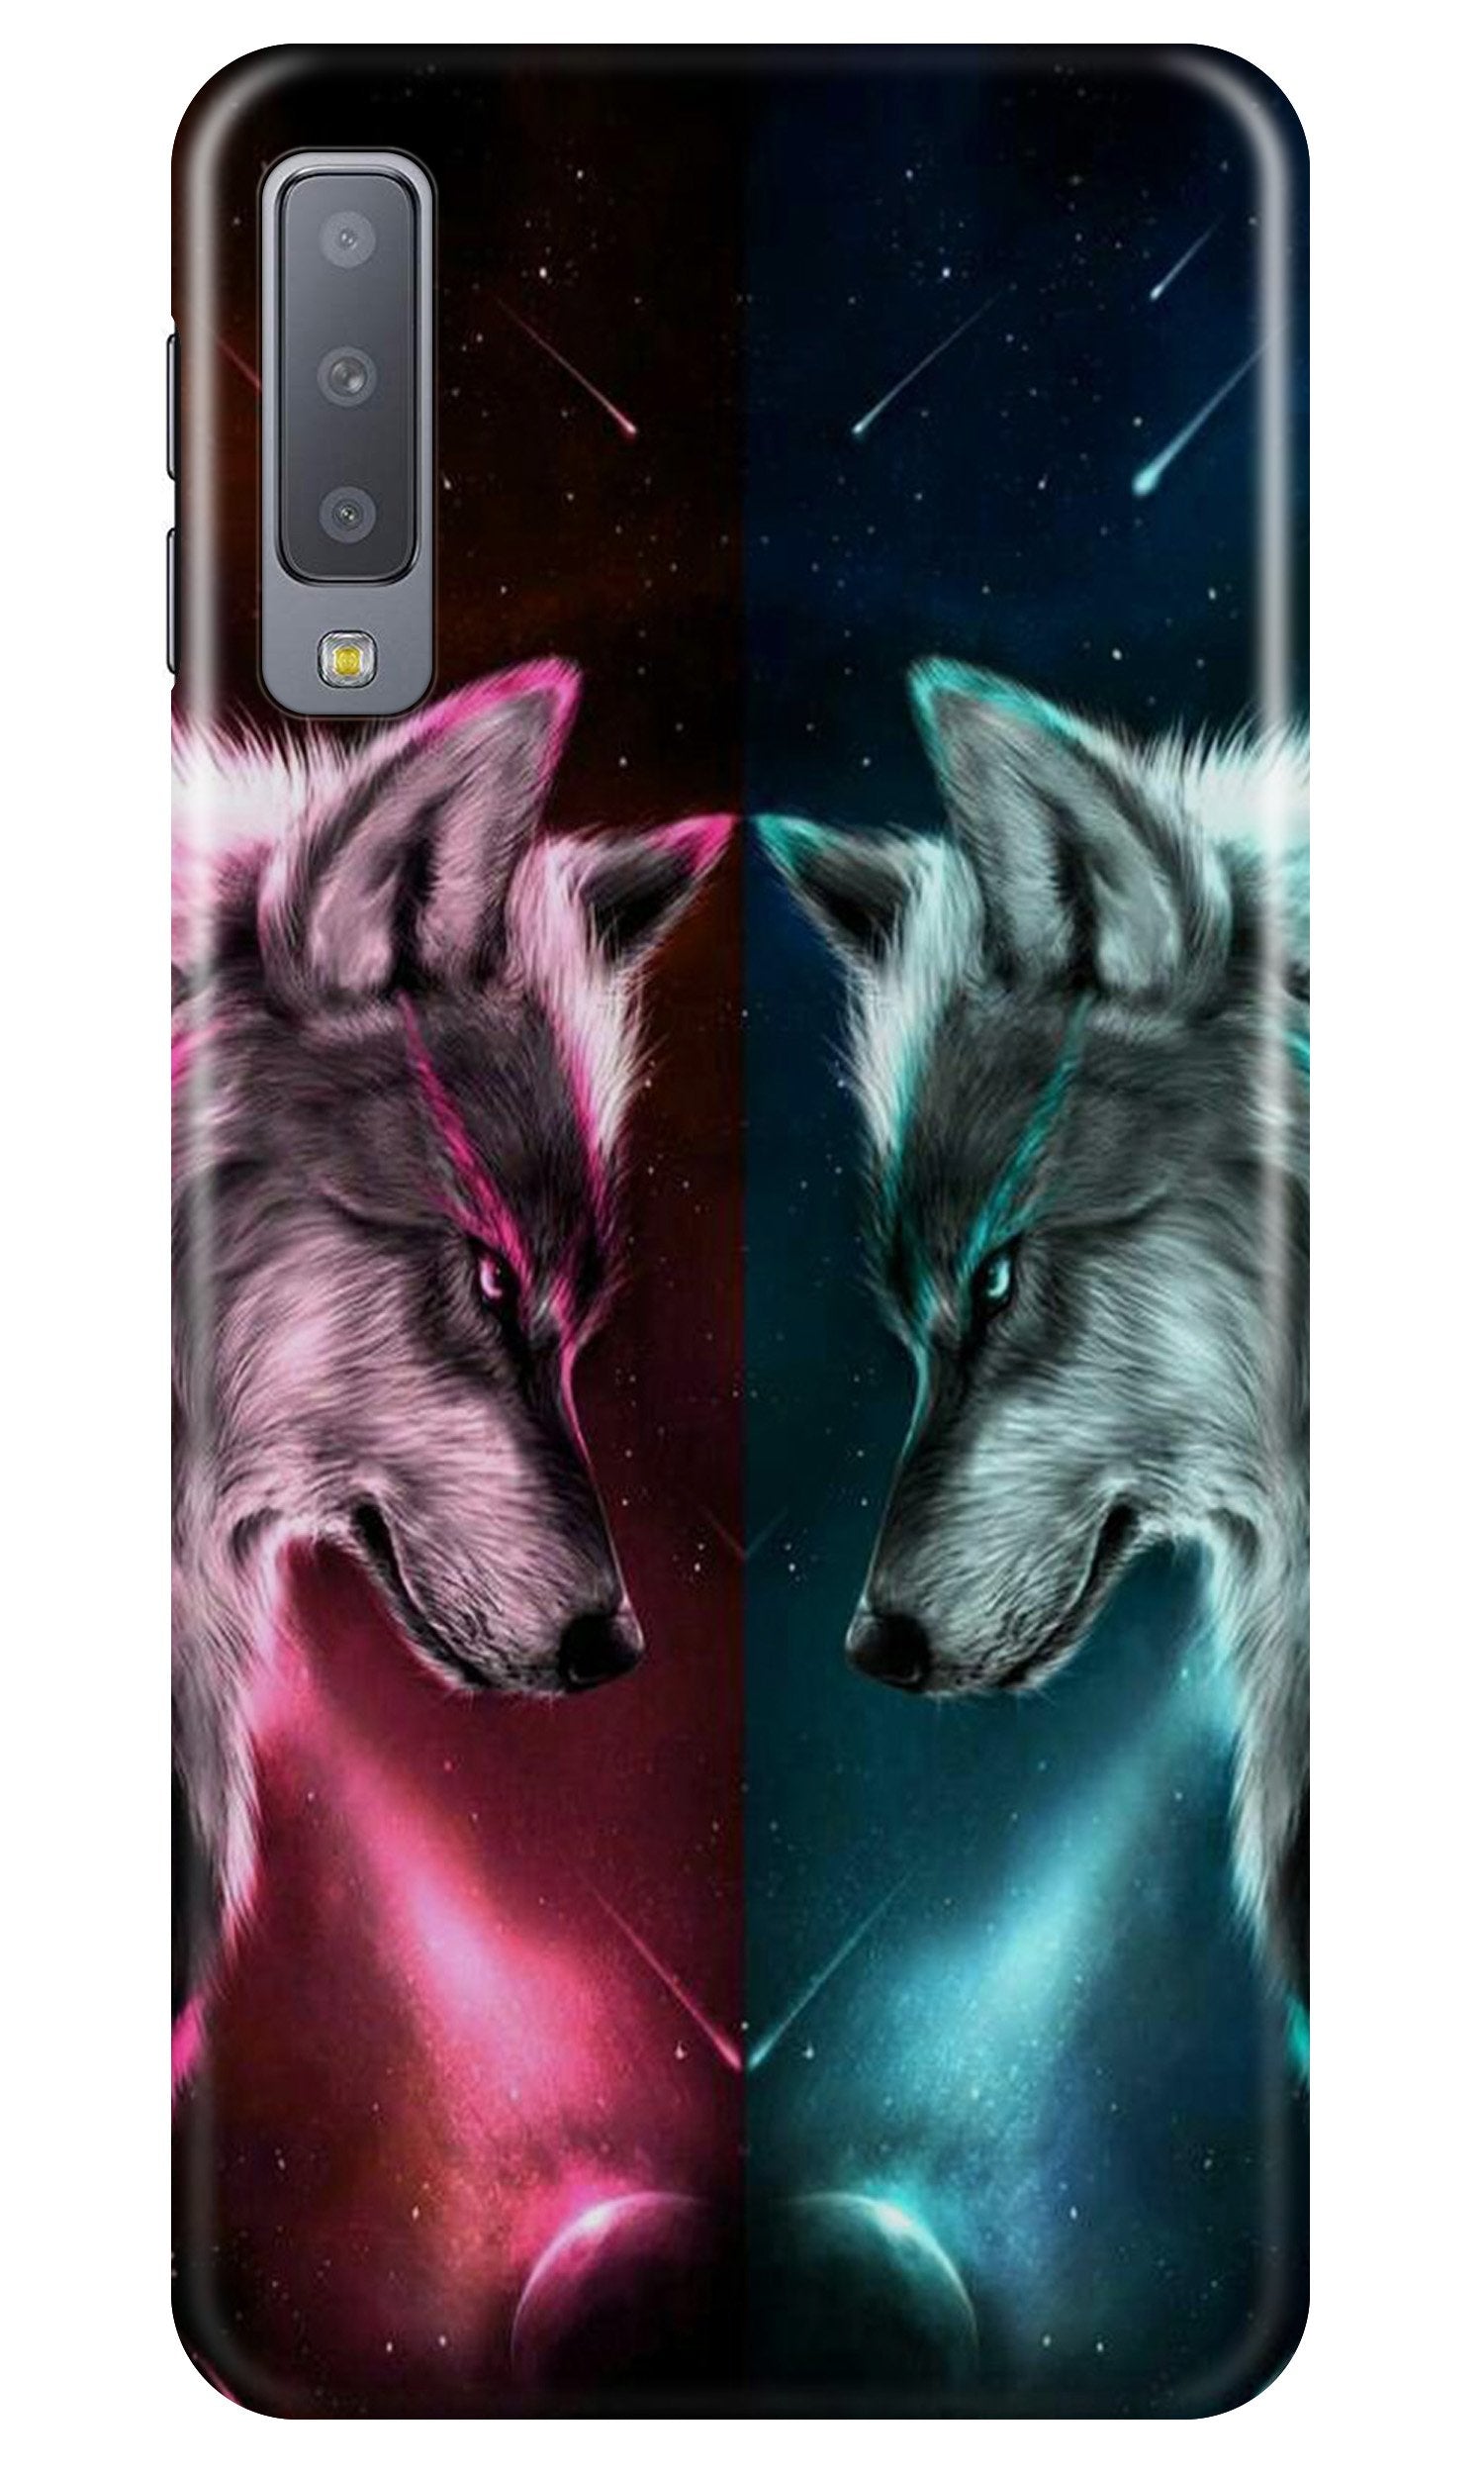 Wolf fight Case for Samung Galaxy A70s (Design No. 221)